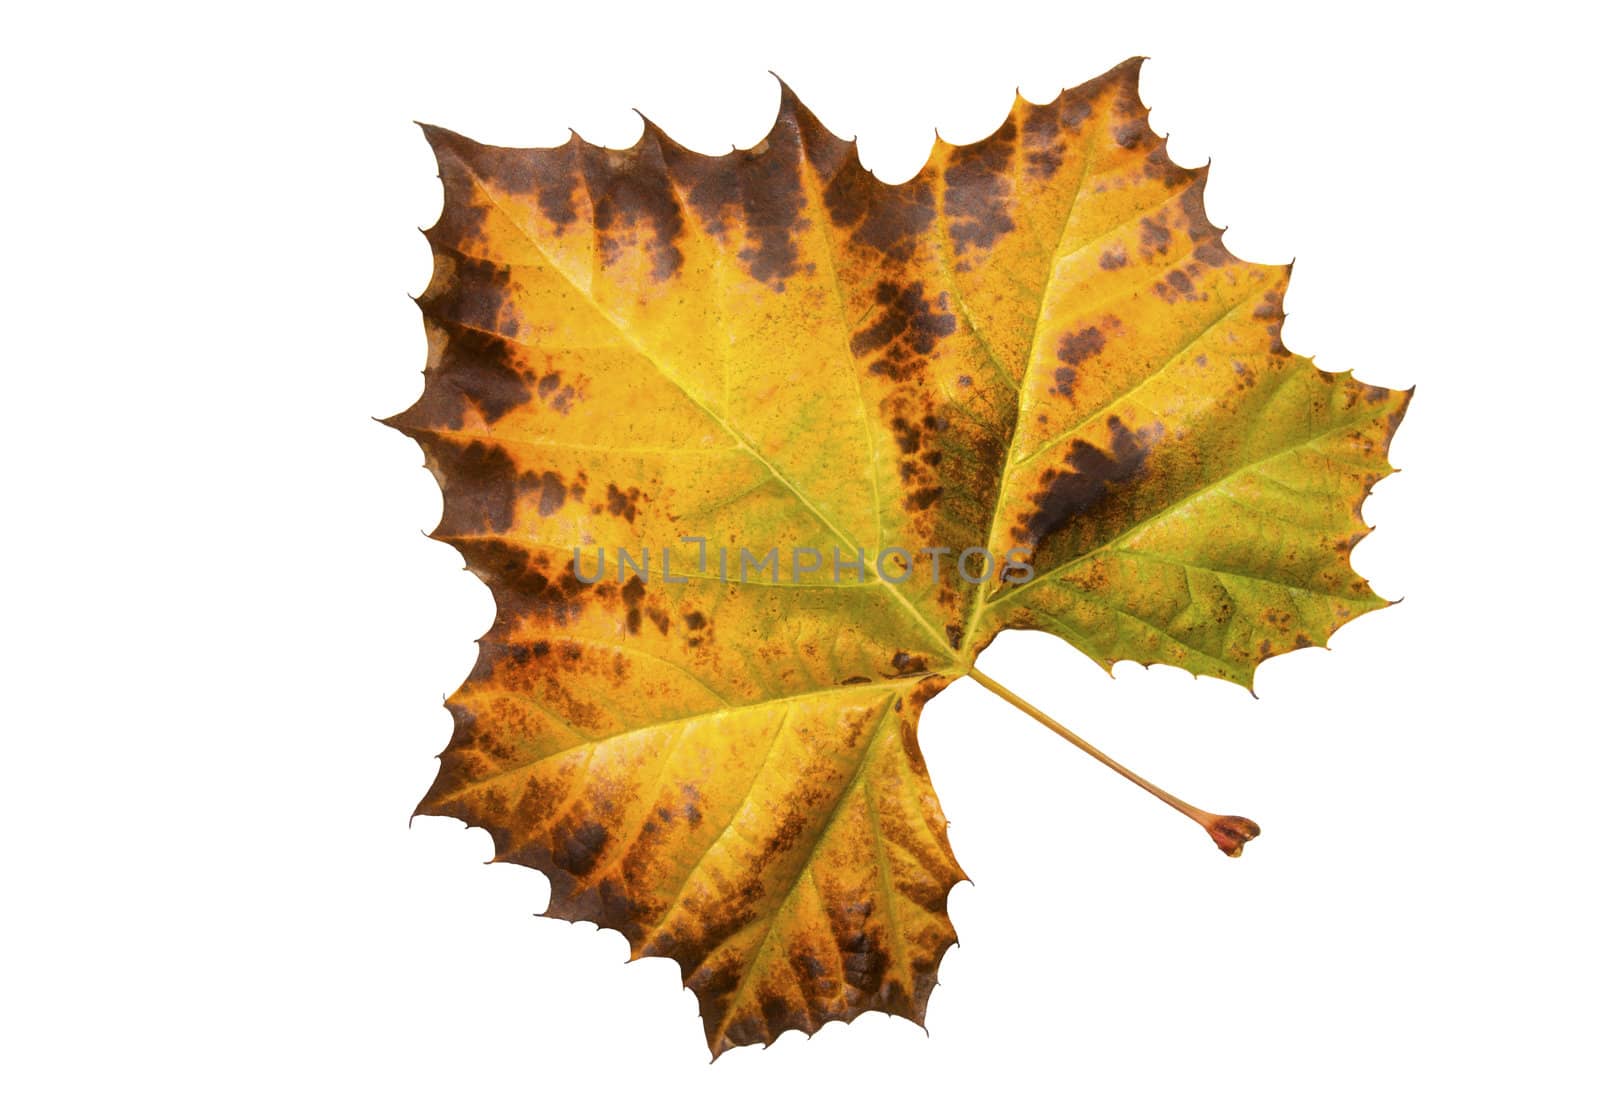 Plain tree leaf in fall colors by waxart